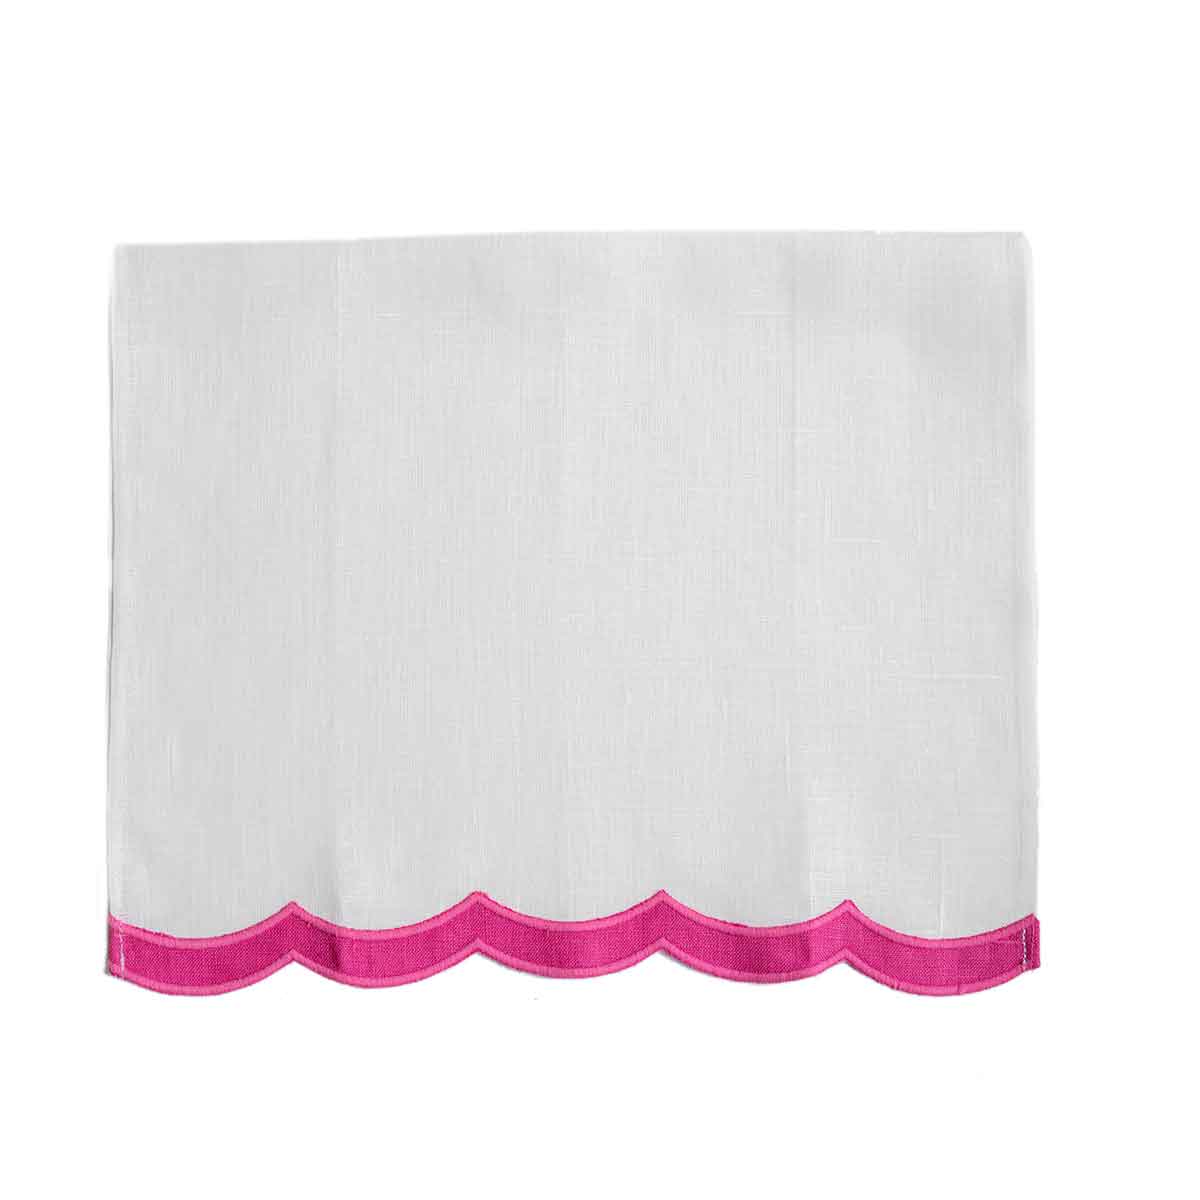 Double Happiness Guest Towel Flamingo Pink | Garden Folly Fine Linens - linen like hand towels, blank embroidery hand towels, guest hand towels linen